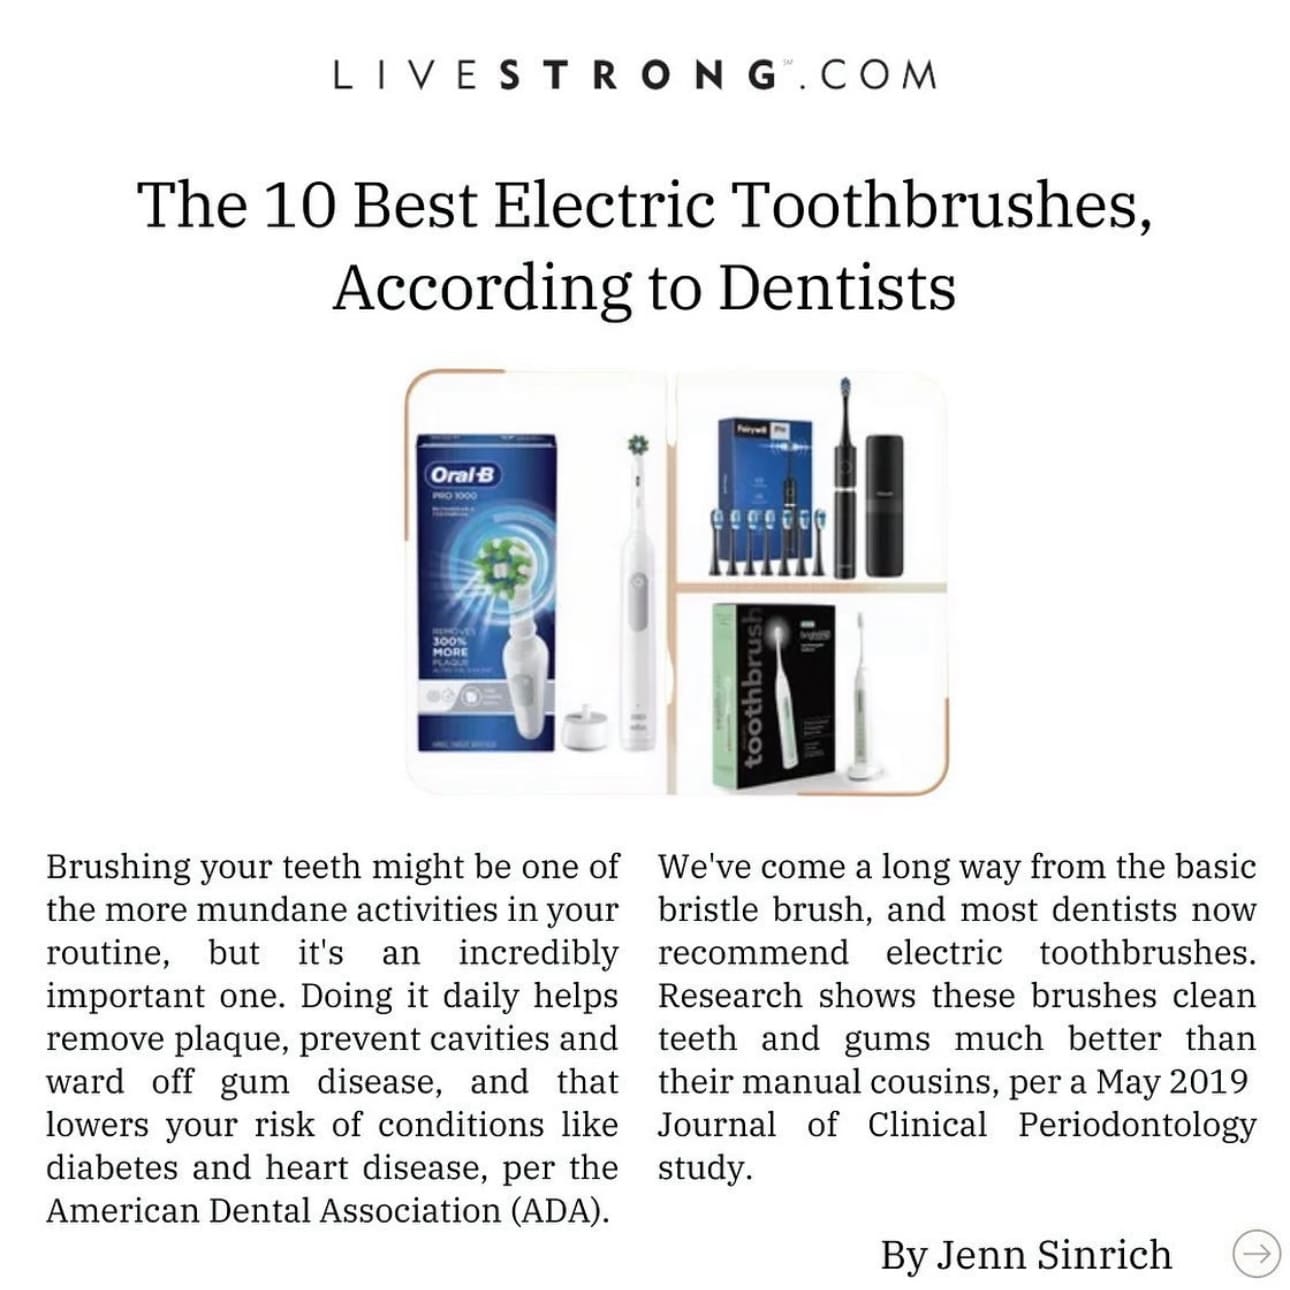 The 10 Best Electric Toothbrushes, According to Dentists